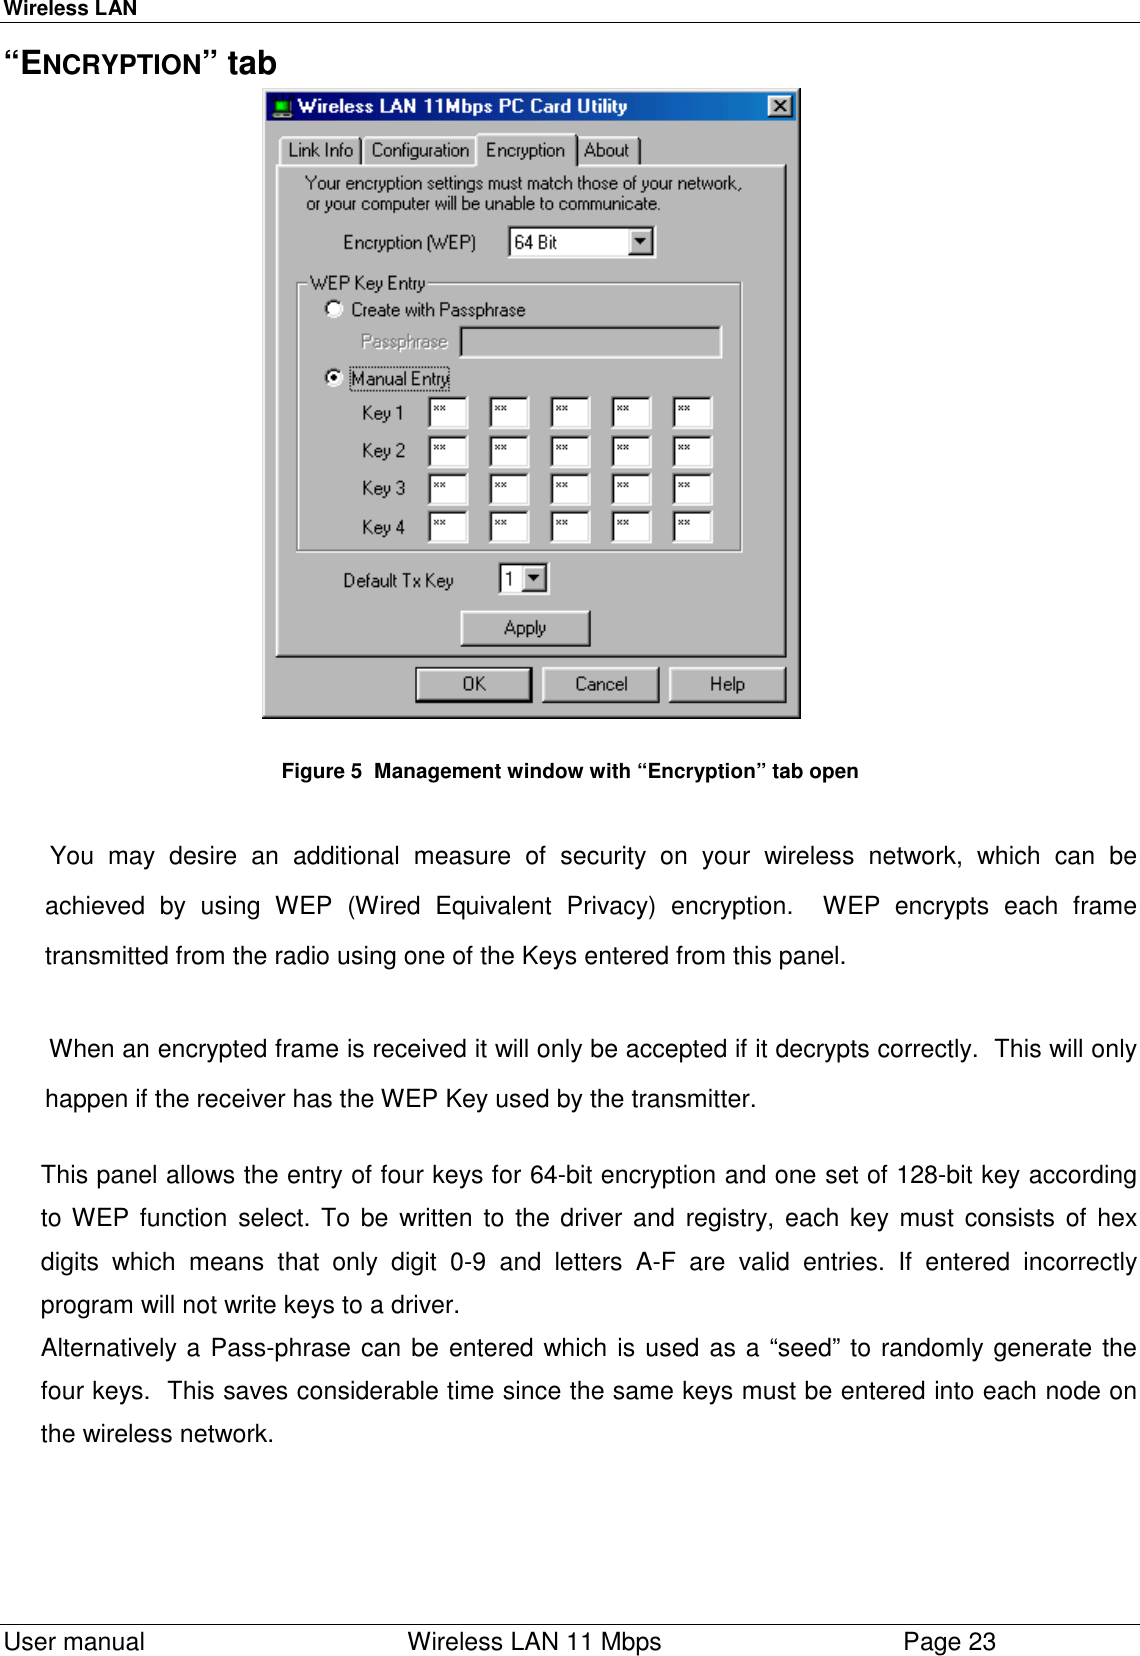 Wireless LAN  User manual    Wireless LAN 11 Mbps Page 23“ENCRYPTION” tab                                                        Figure 5  Management window with “Encryption” tab open You may desire an additional measure of security on your wireless network, which can beachieved by using WEP (Wired Equivalent Privacy) encryption.  WEP encrypts each frametransmitted from the radio using one of the Keys entered from this panel.When an encrypted frame is received it will only be accepted if it decrypts correctly.  This will onlyhappen if the receiver has the WEP Key used by the transmitter.This panel allows the entry of four keys for 64-bit encryption and one set of 128-bit key accordingto WEP function select. To be written to the driver and registry, each key must consists of hexdigits which means that only digit 0-9 and letters A-F are valid entries. If entered incorrectlyprogram will not write keys to a driver.Alternatively a Pass-phrase can be entered which is used as a “seed” to randomly generate thefour keys.  This saves considerable time since the same keys must be entered into each node onthe wireless network.